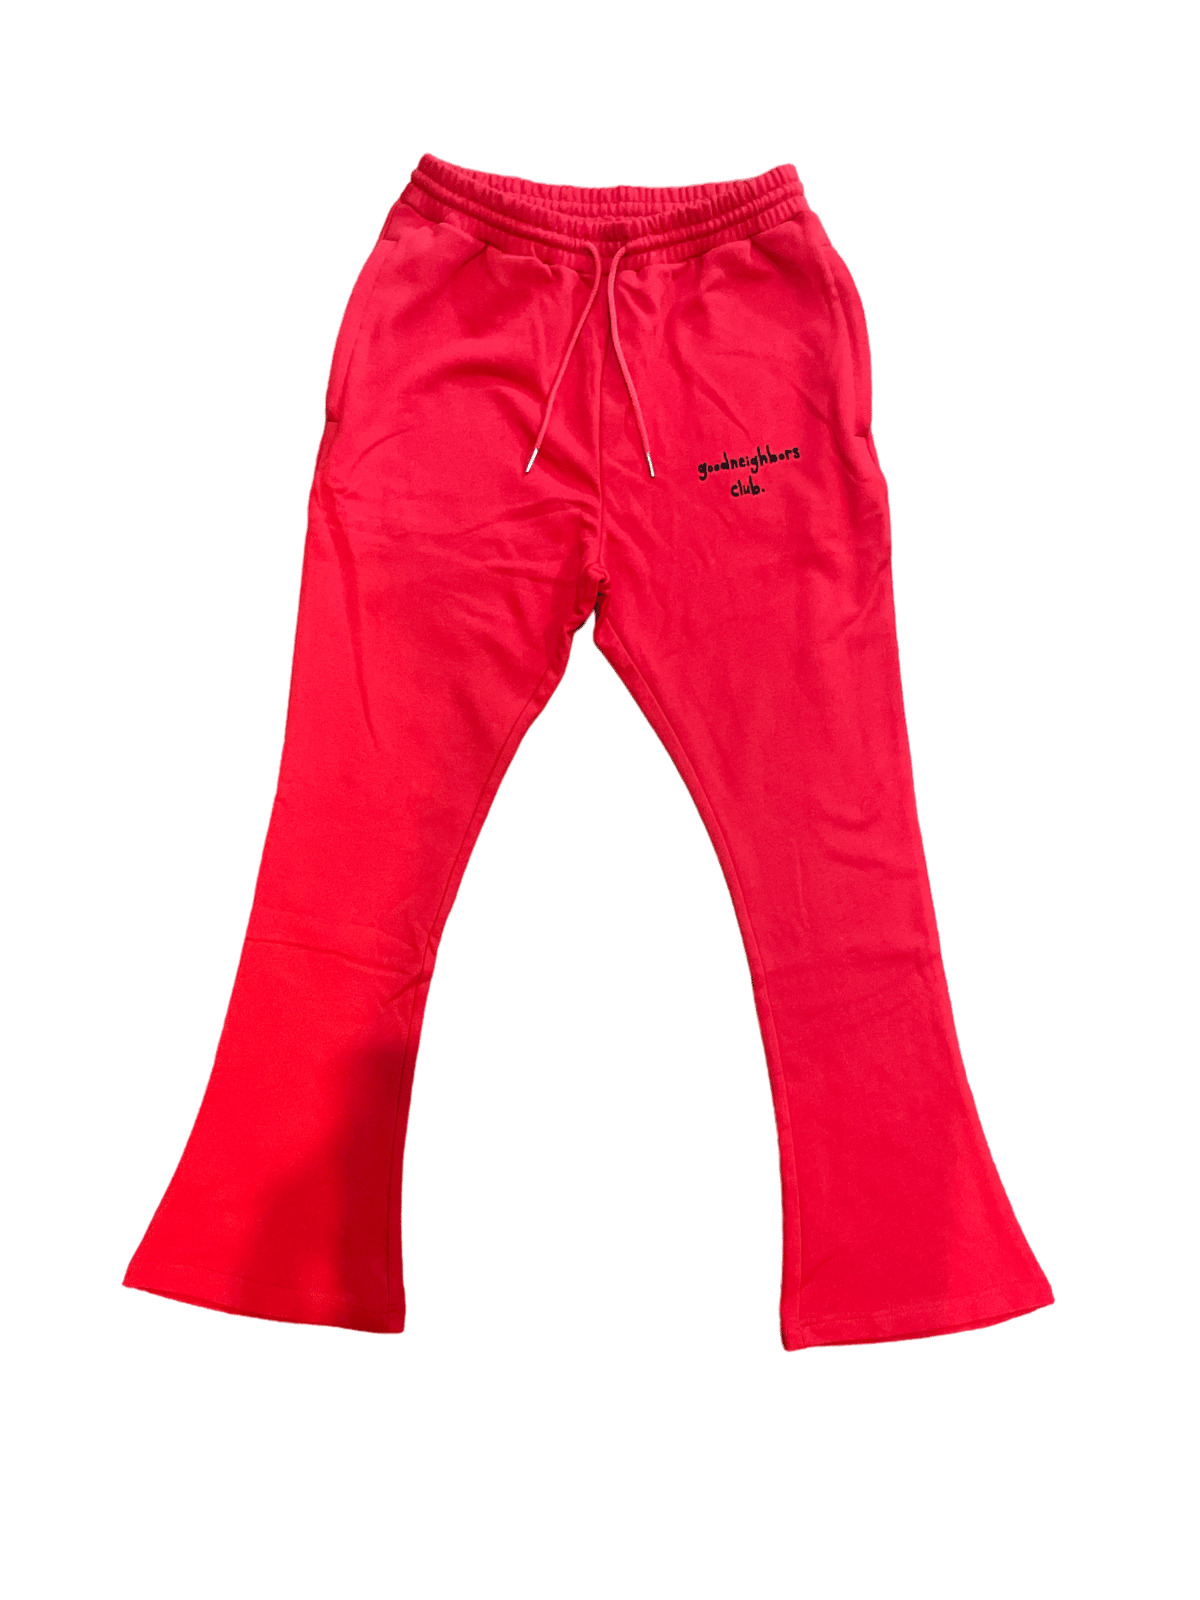 Image of Red Sweatpants 